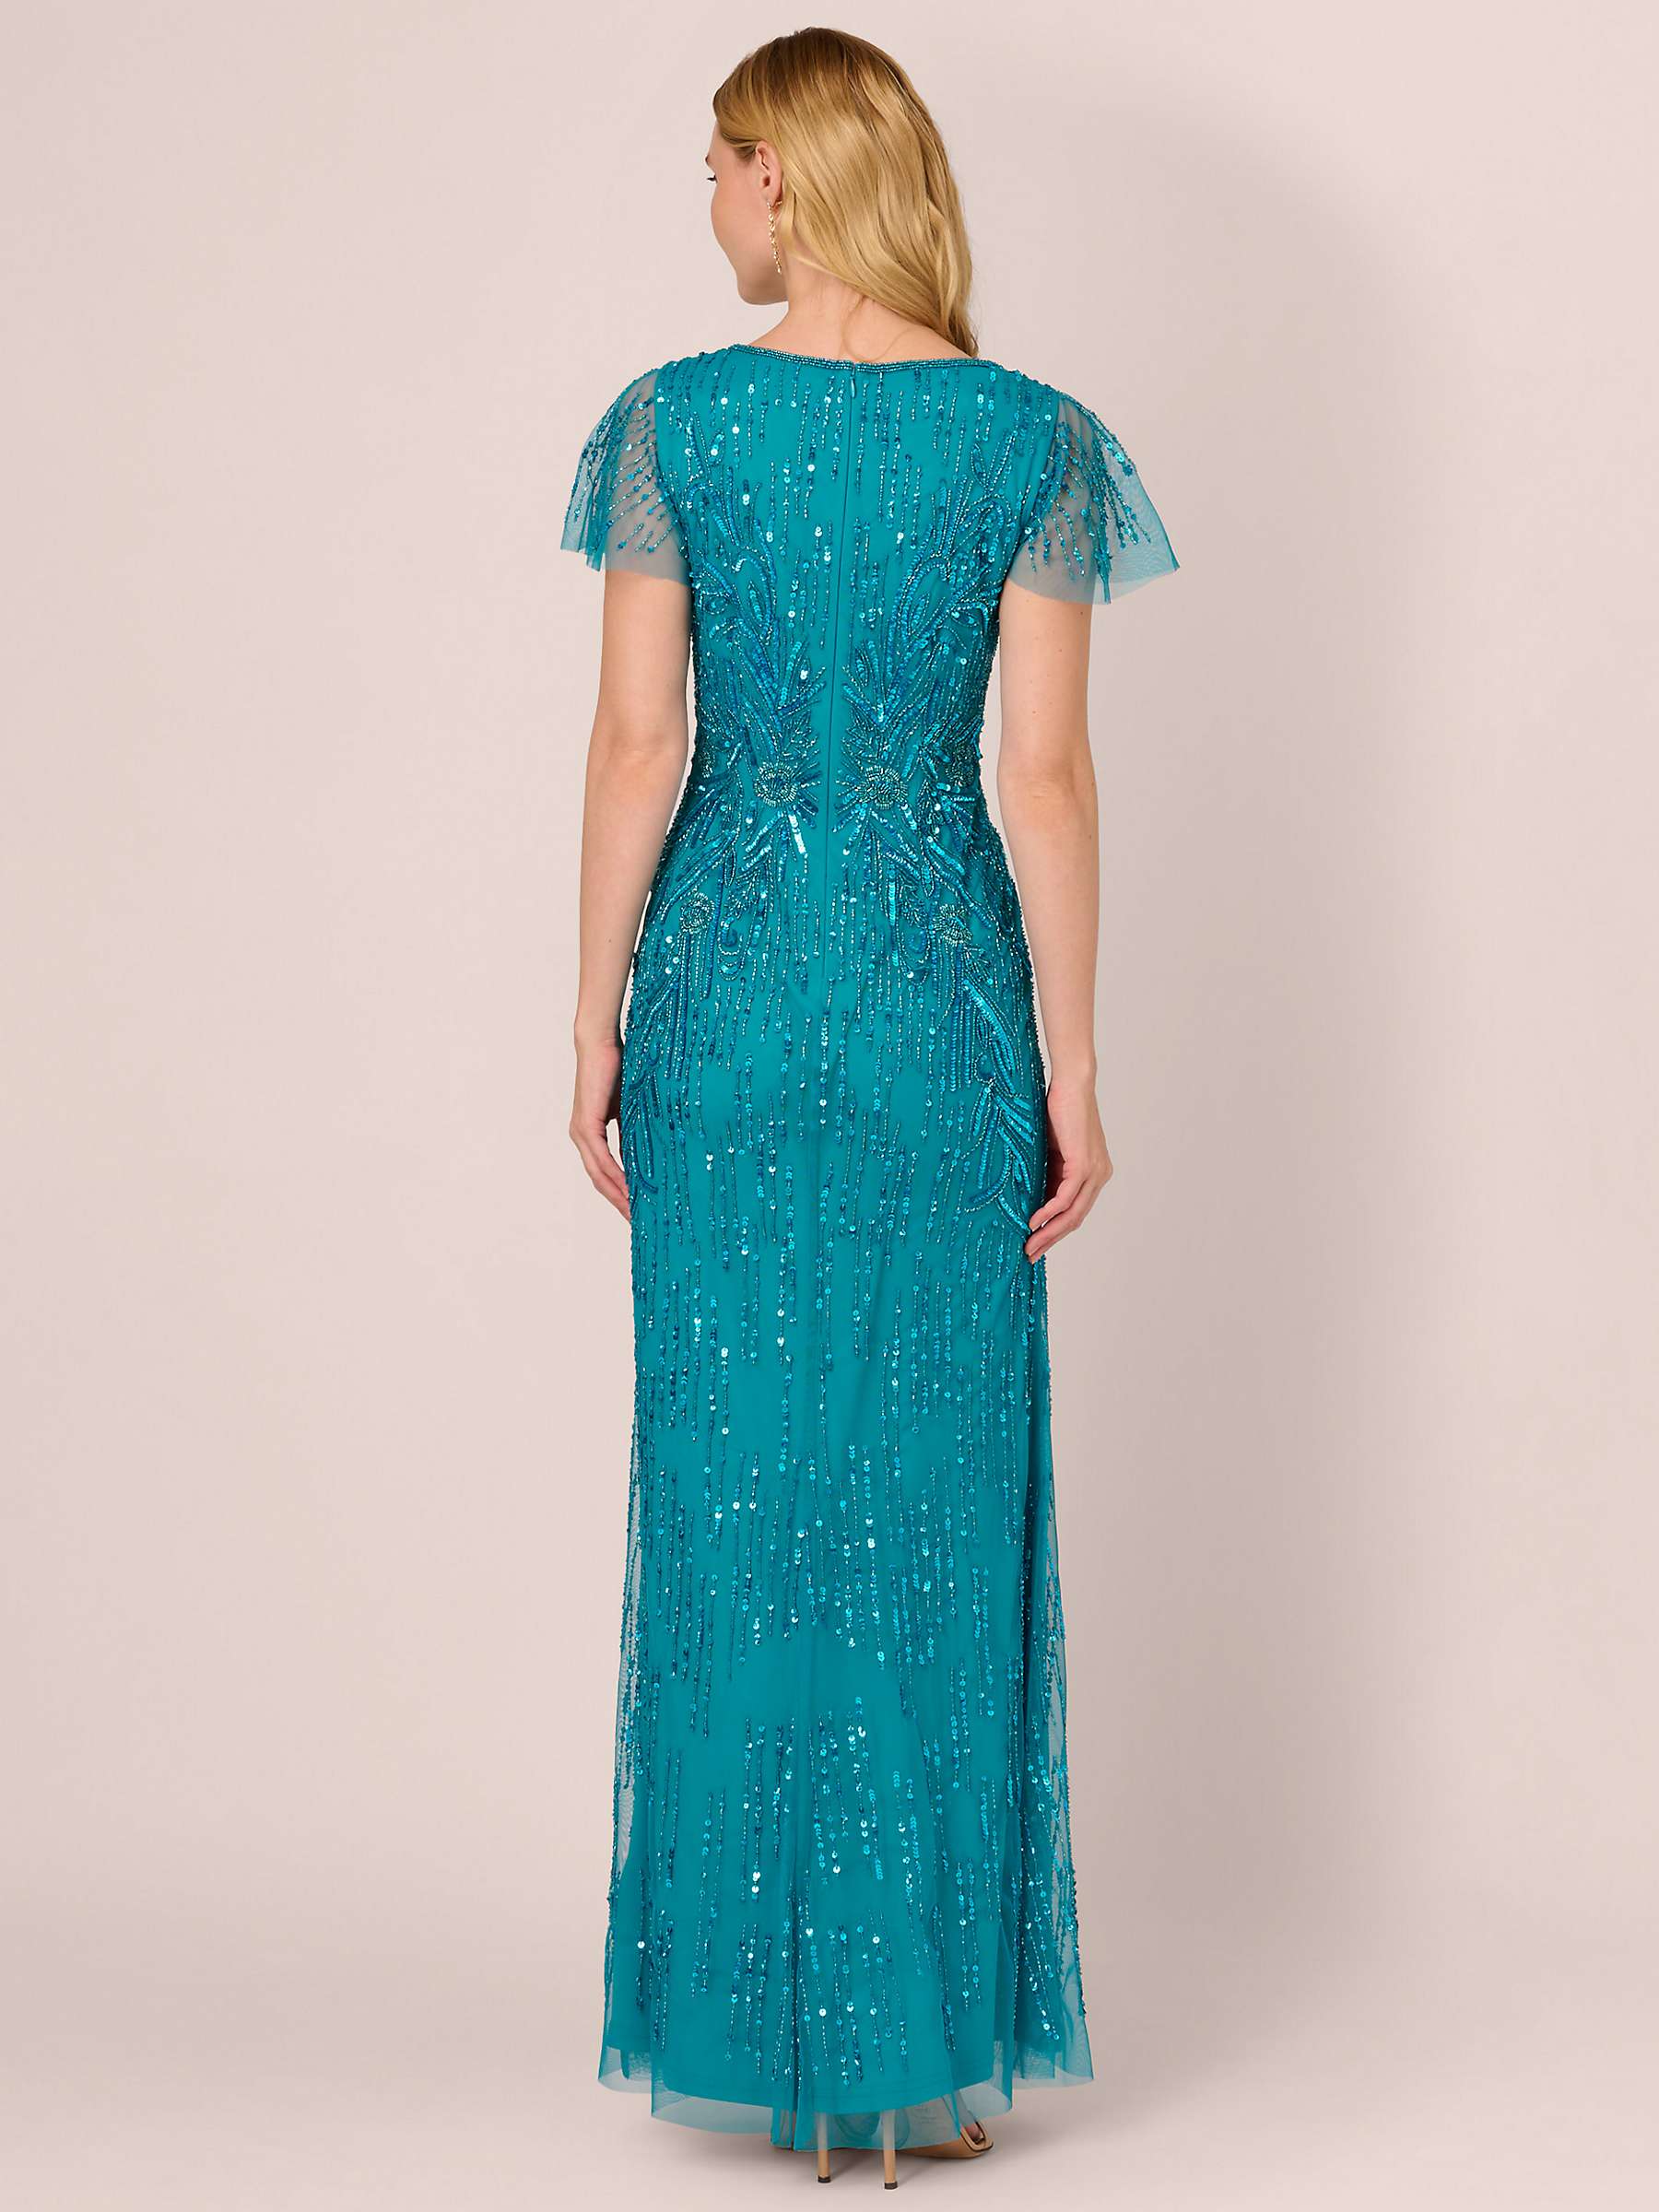 Buy Adrianna Papell Flutter Sleeve Beaded Maxi Dress, Teal Online at johnlewis.com